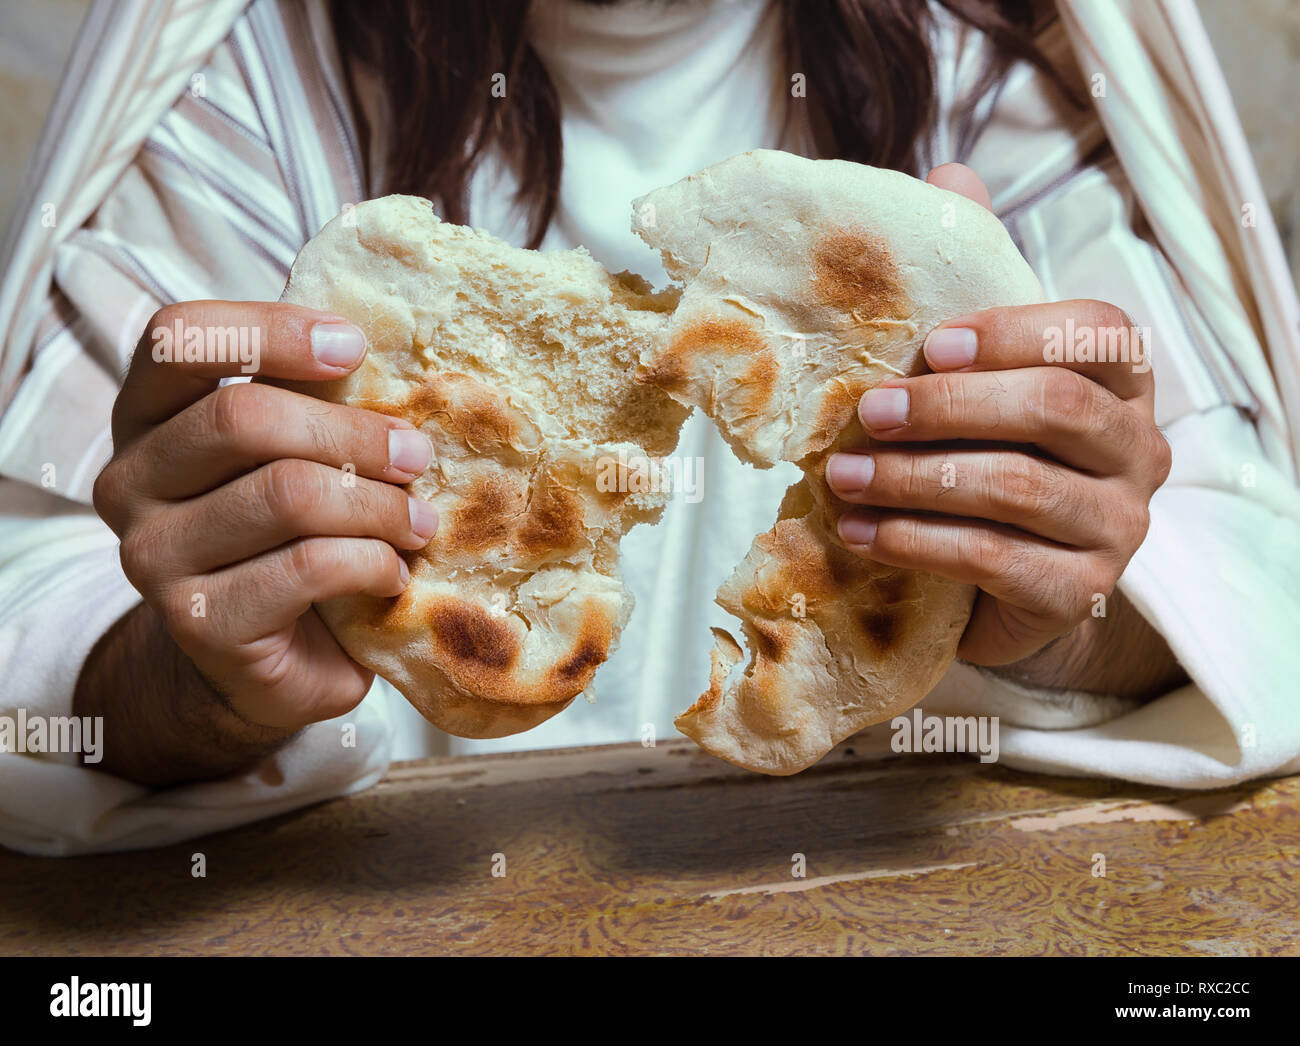 Authentic reenactment scene of Jesus breaking the bread during Last Supper, saying 'this is my body'. Stock Photo